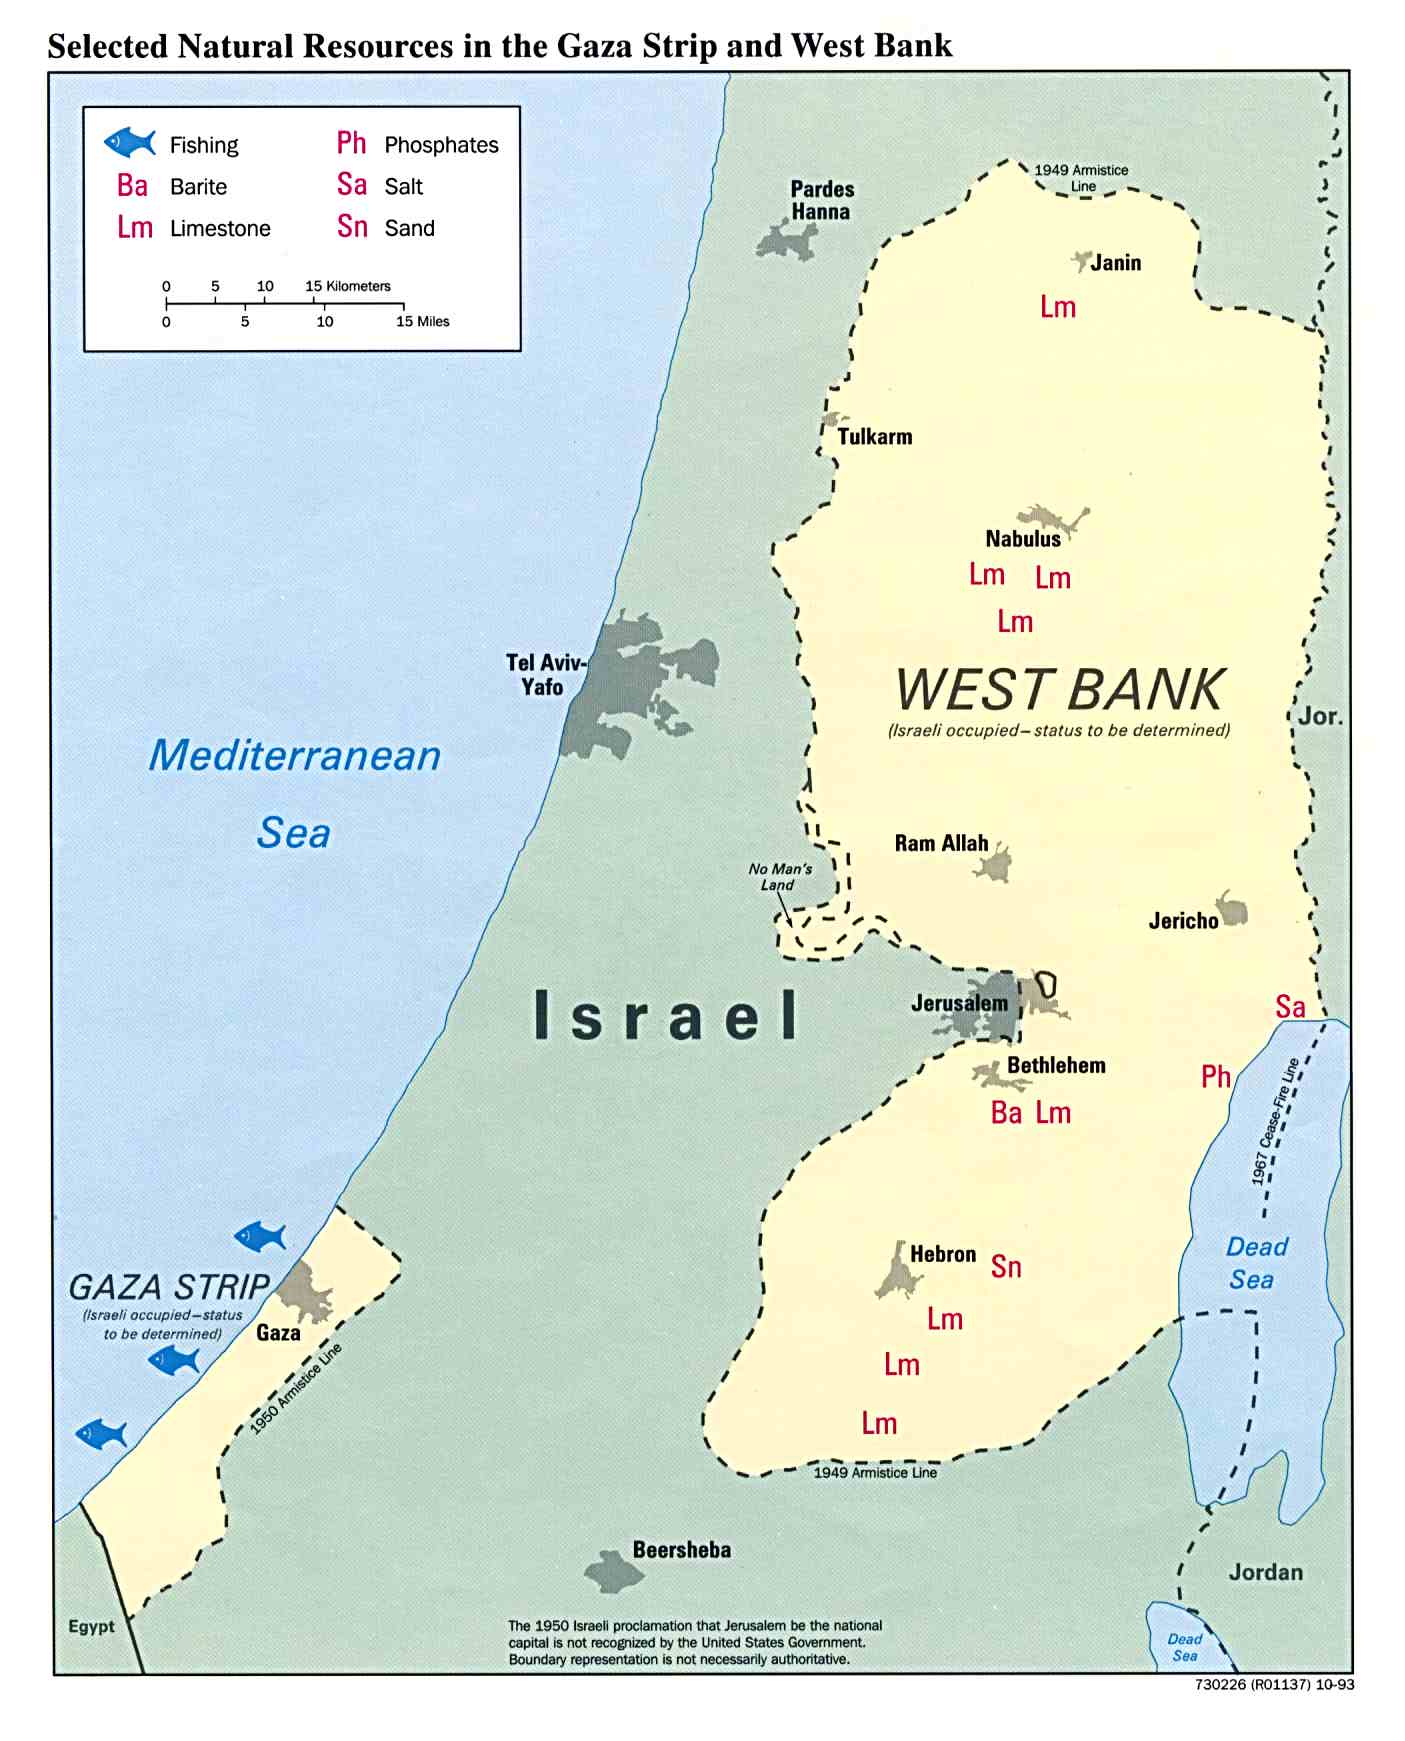 Crusher reccomend Map of gaza strip and west bank